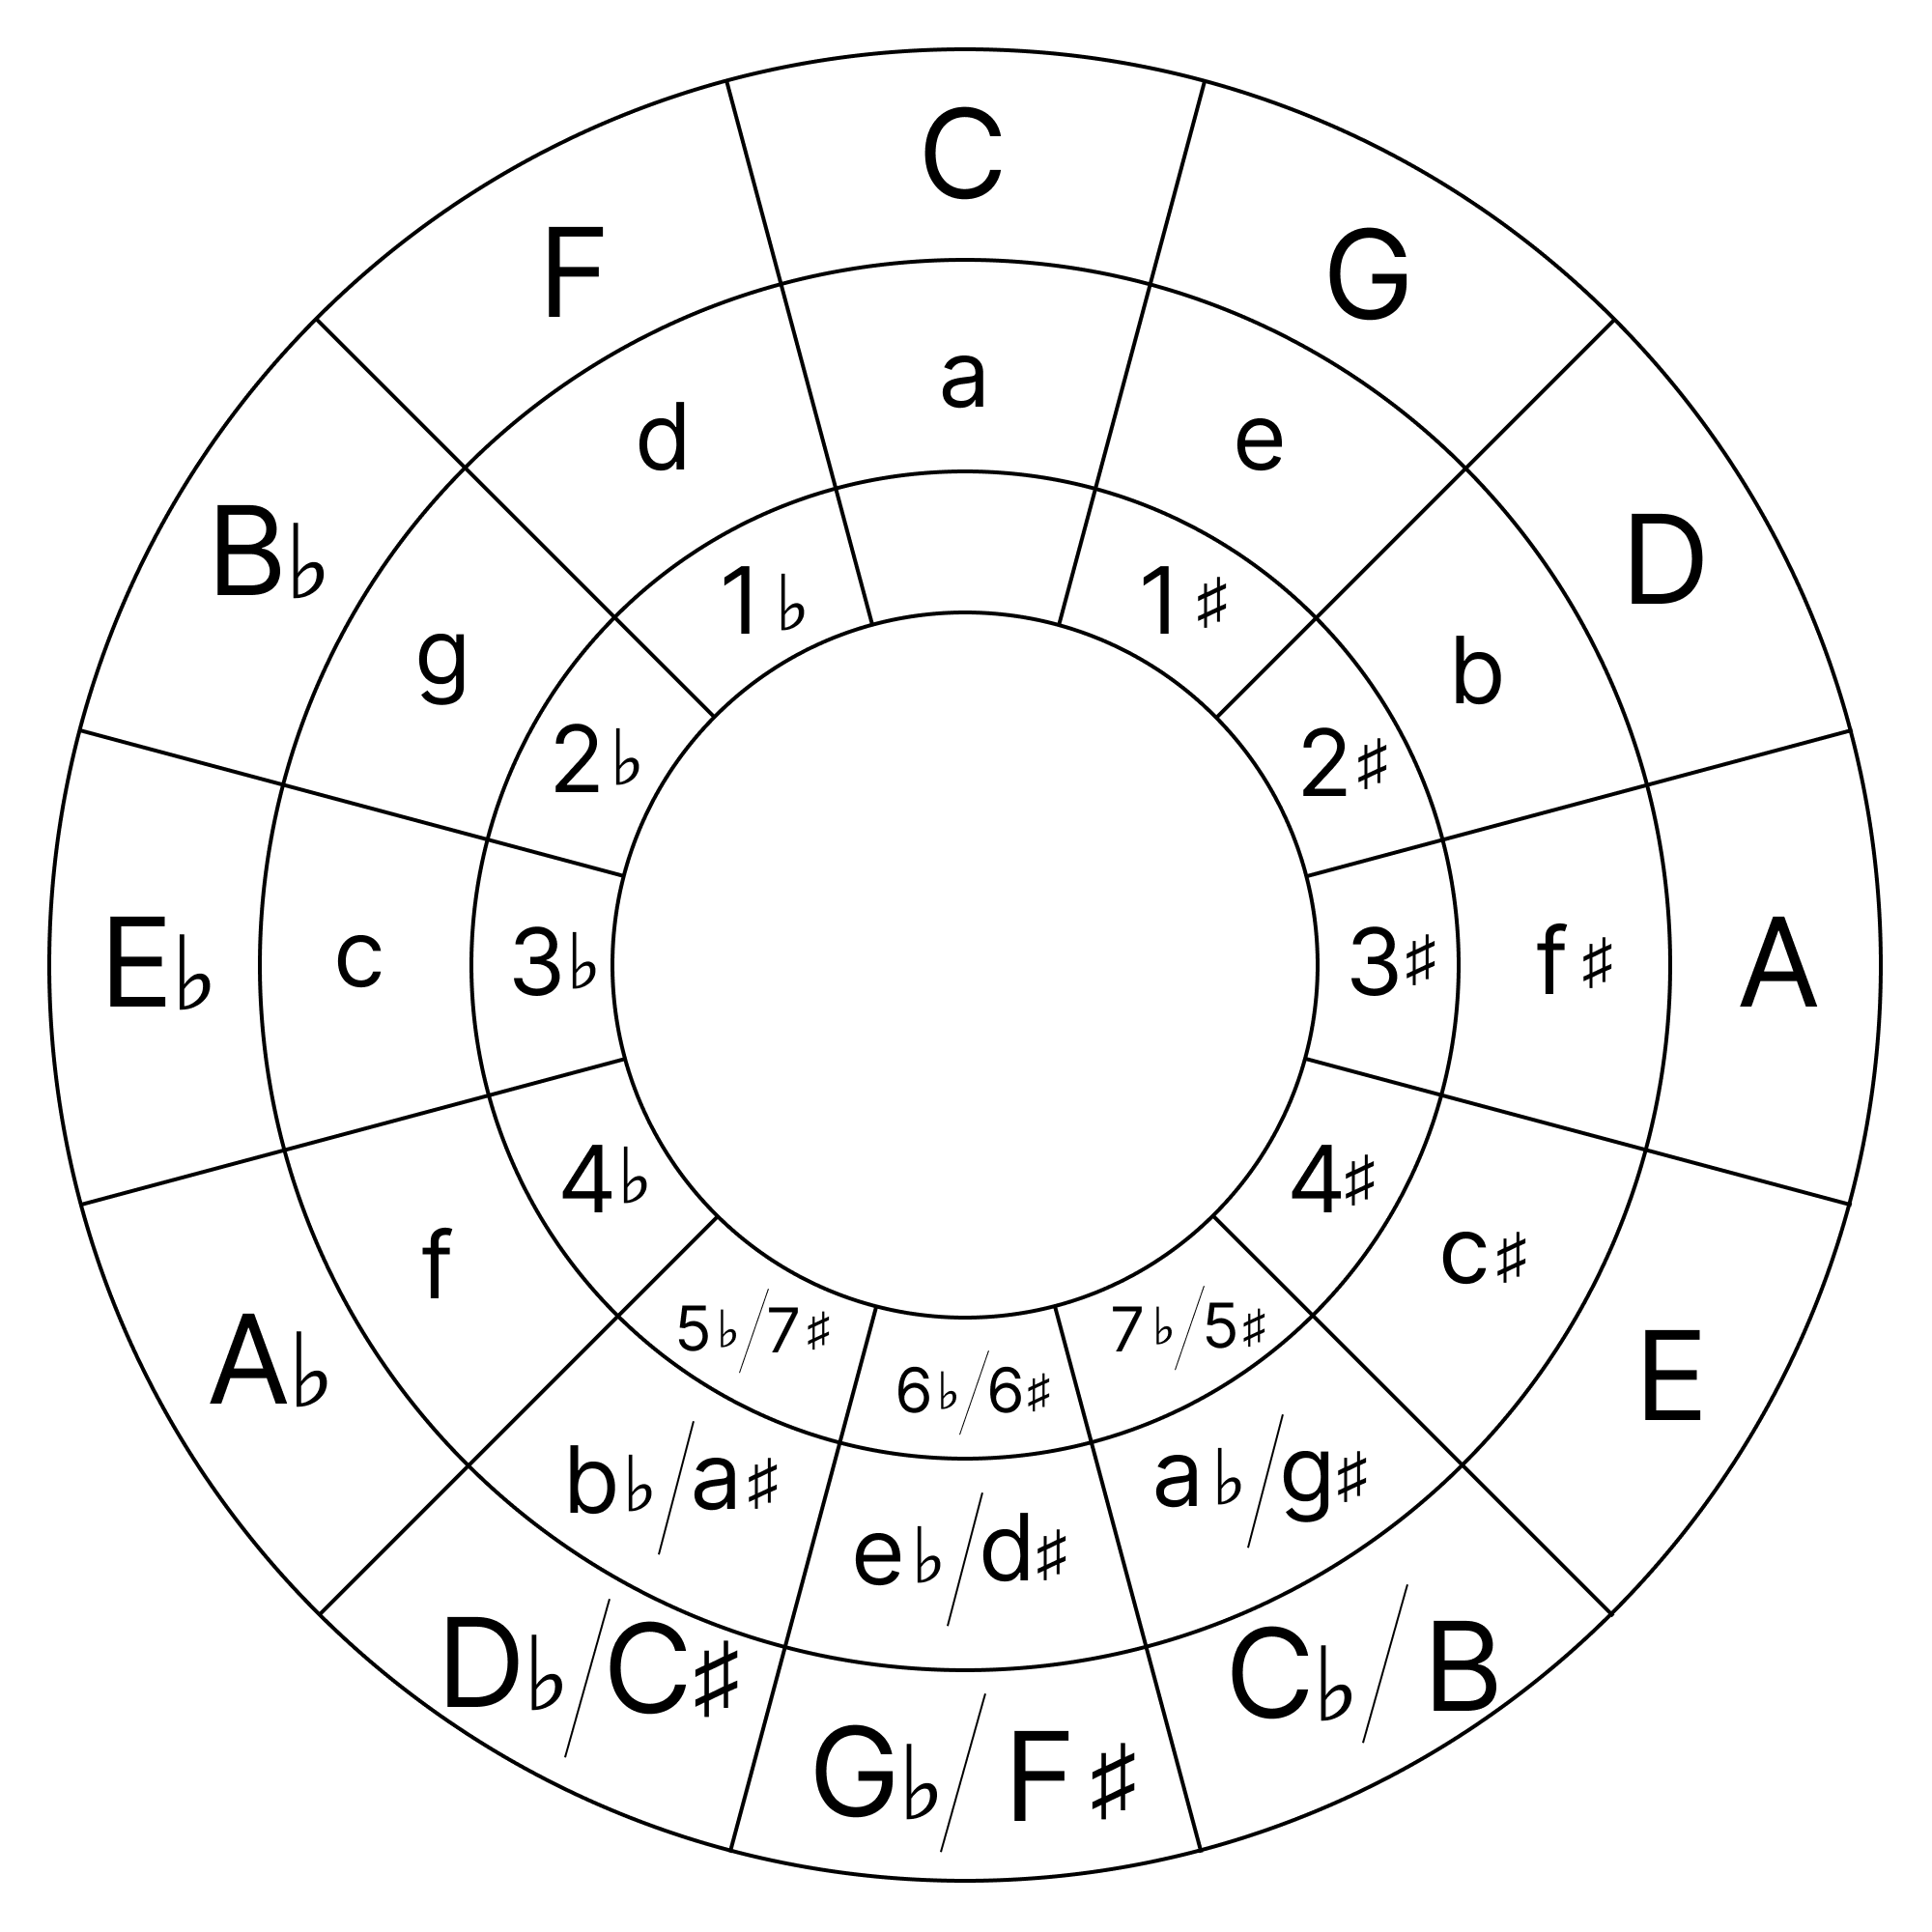 circle-of-fifths-music-theory-training